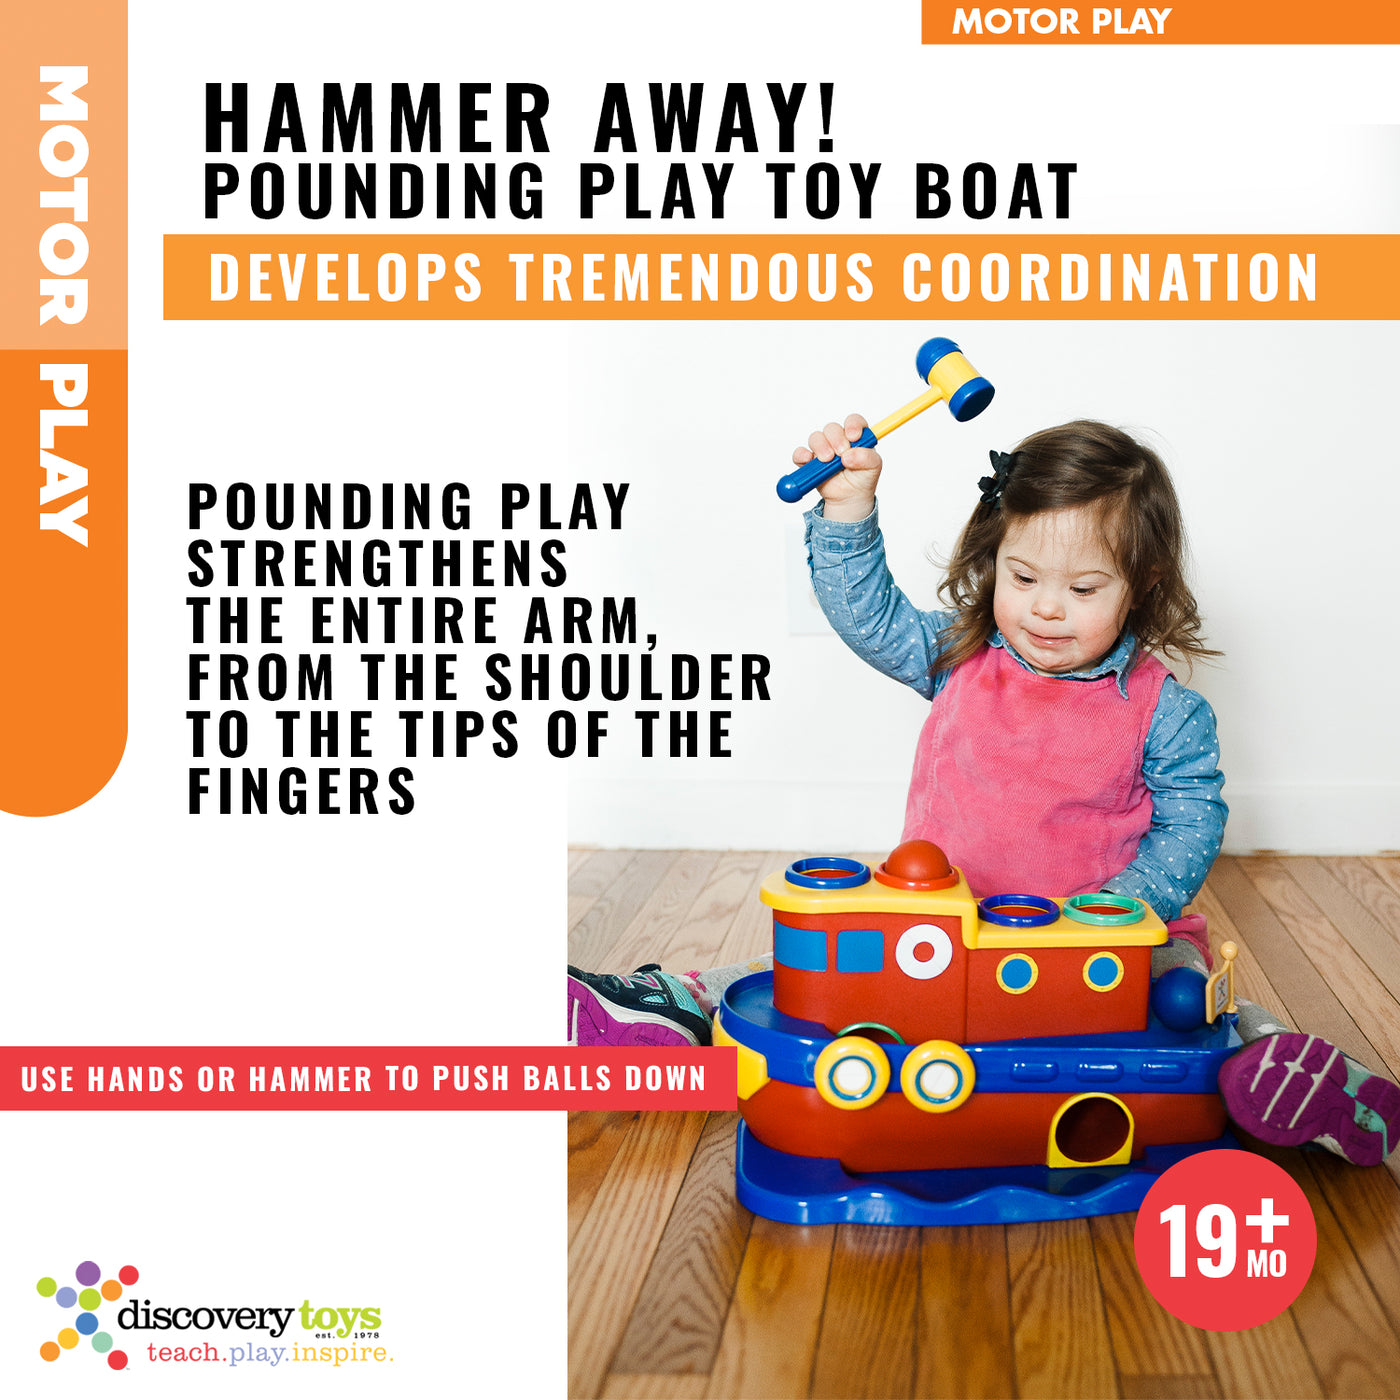 HAMMER AWAY! Toddler Hammer Ball Banging Bench Toy - Discovery Toys